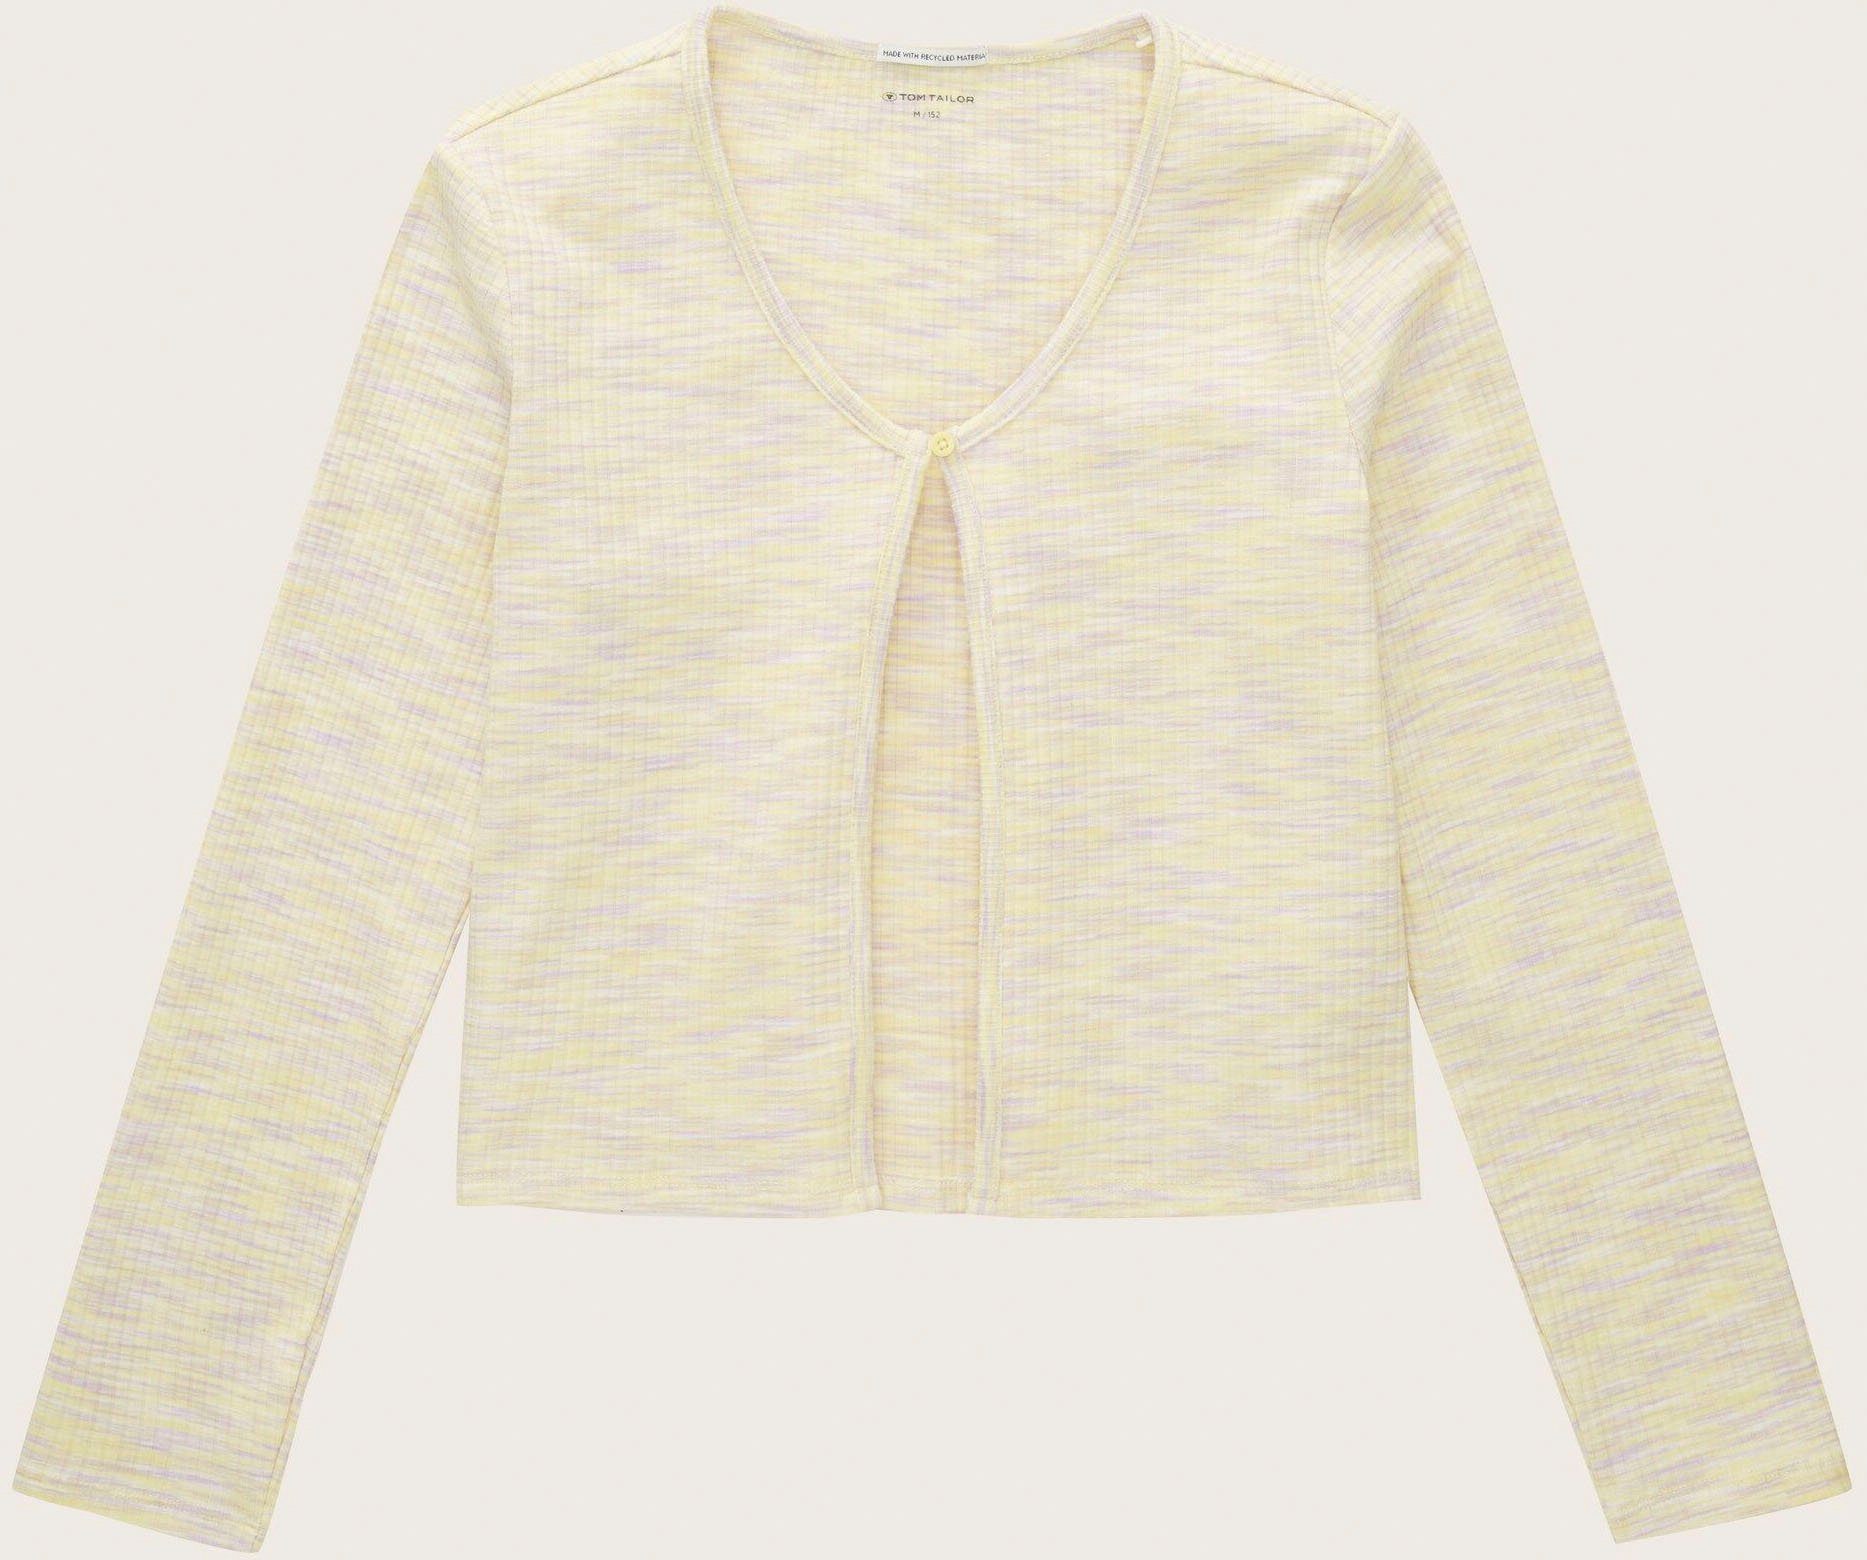 TOM TAILOR Shirtjacke mit Knopfverschluss lime lilac white space dye